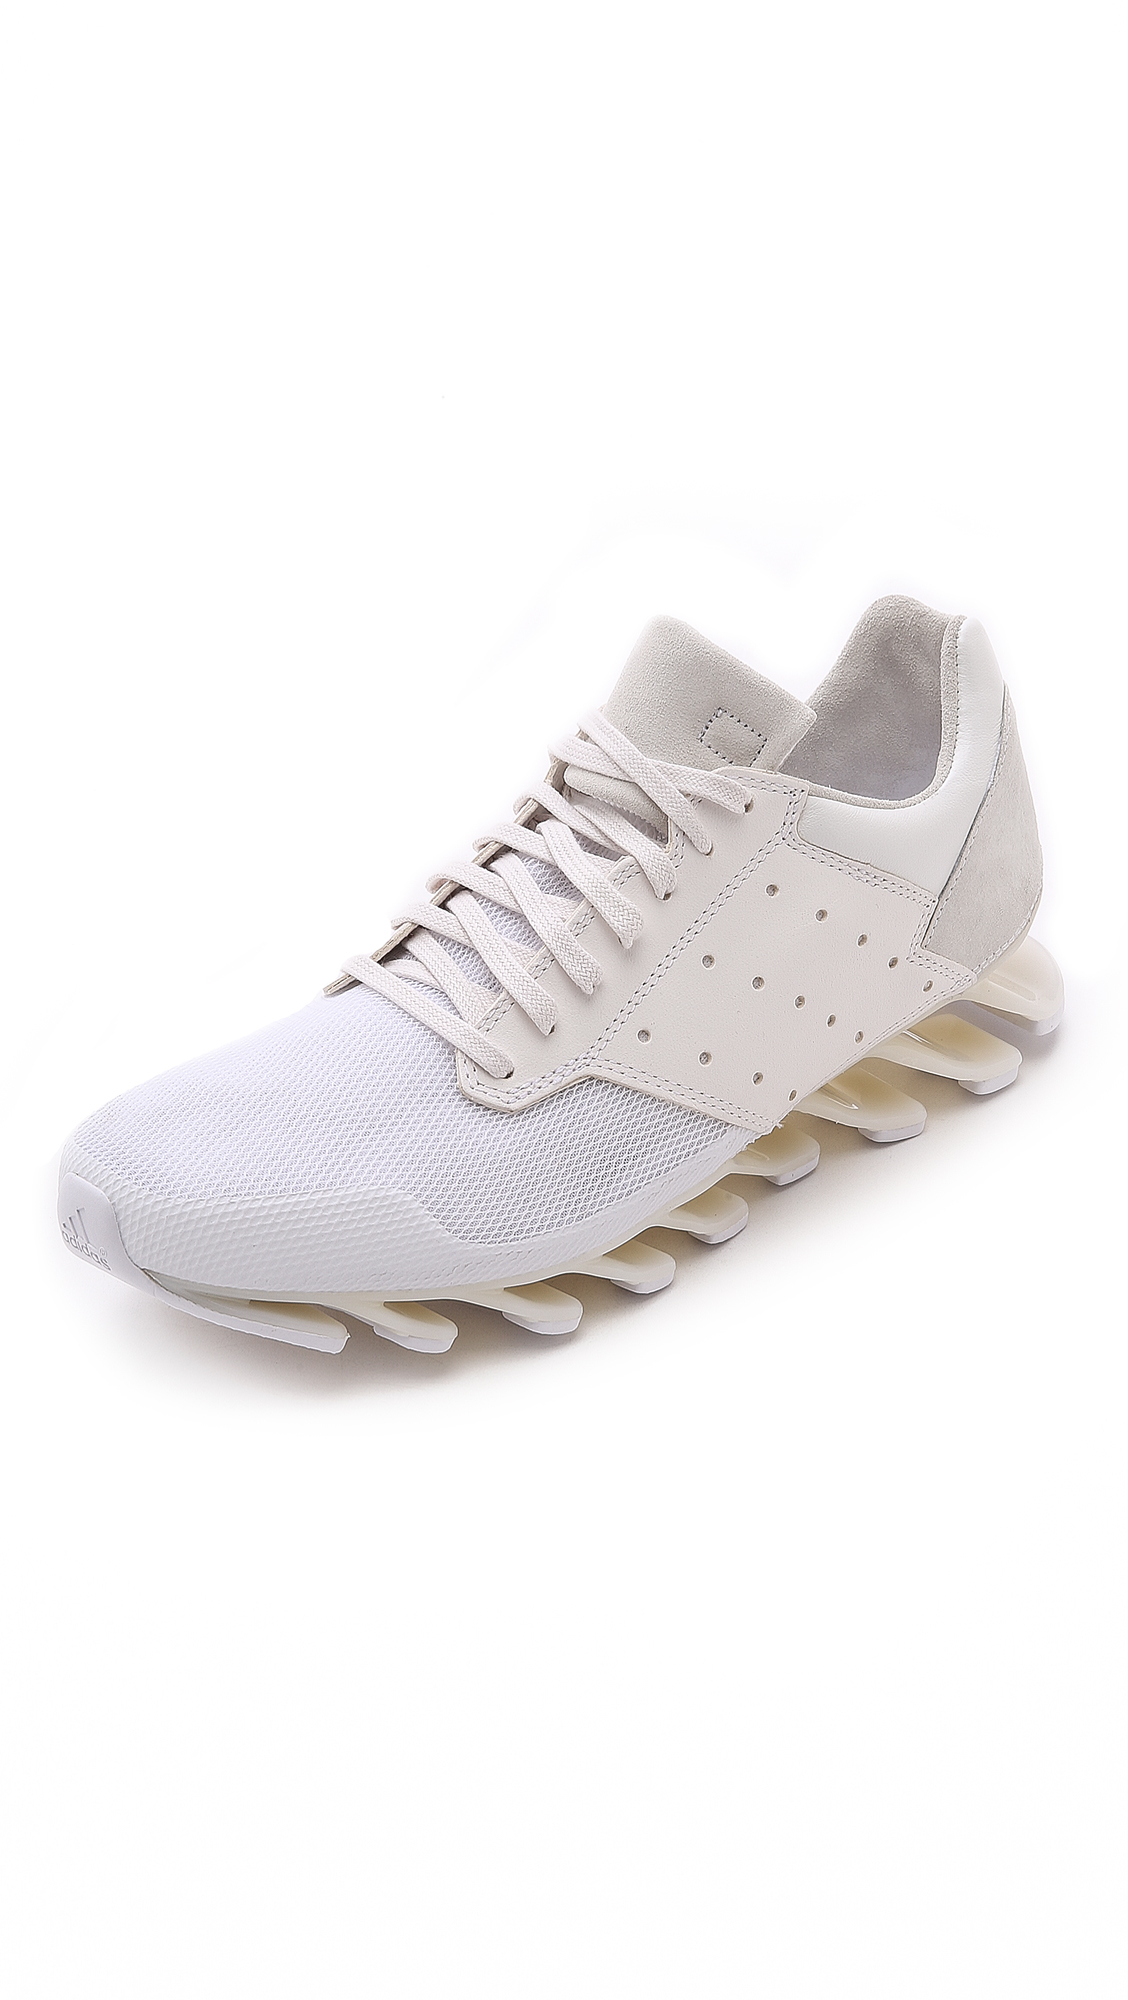 Rick Owens X Adidas Rick Owens Springblade Sneakers in White for Men ...